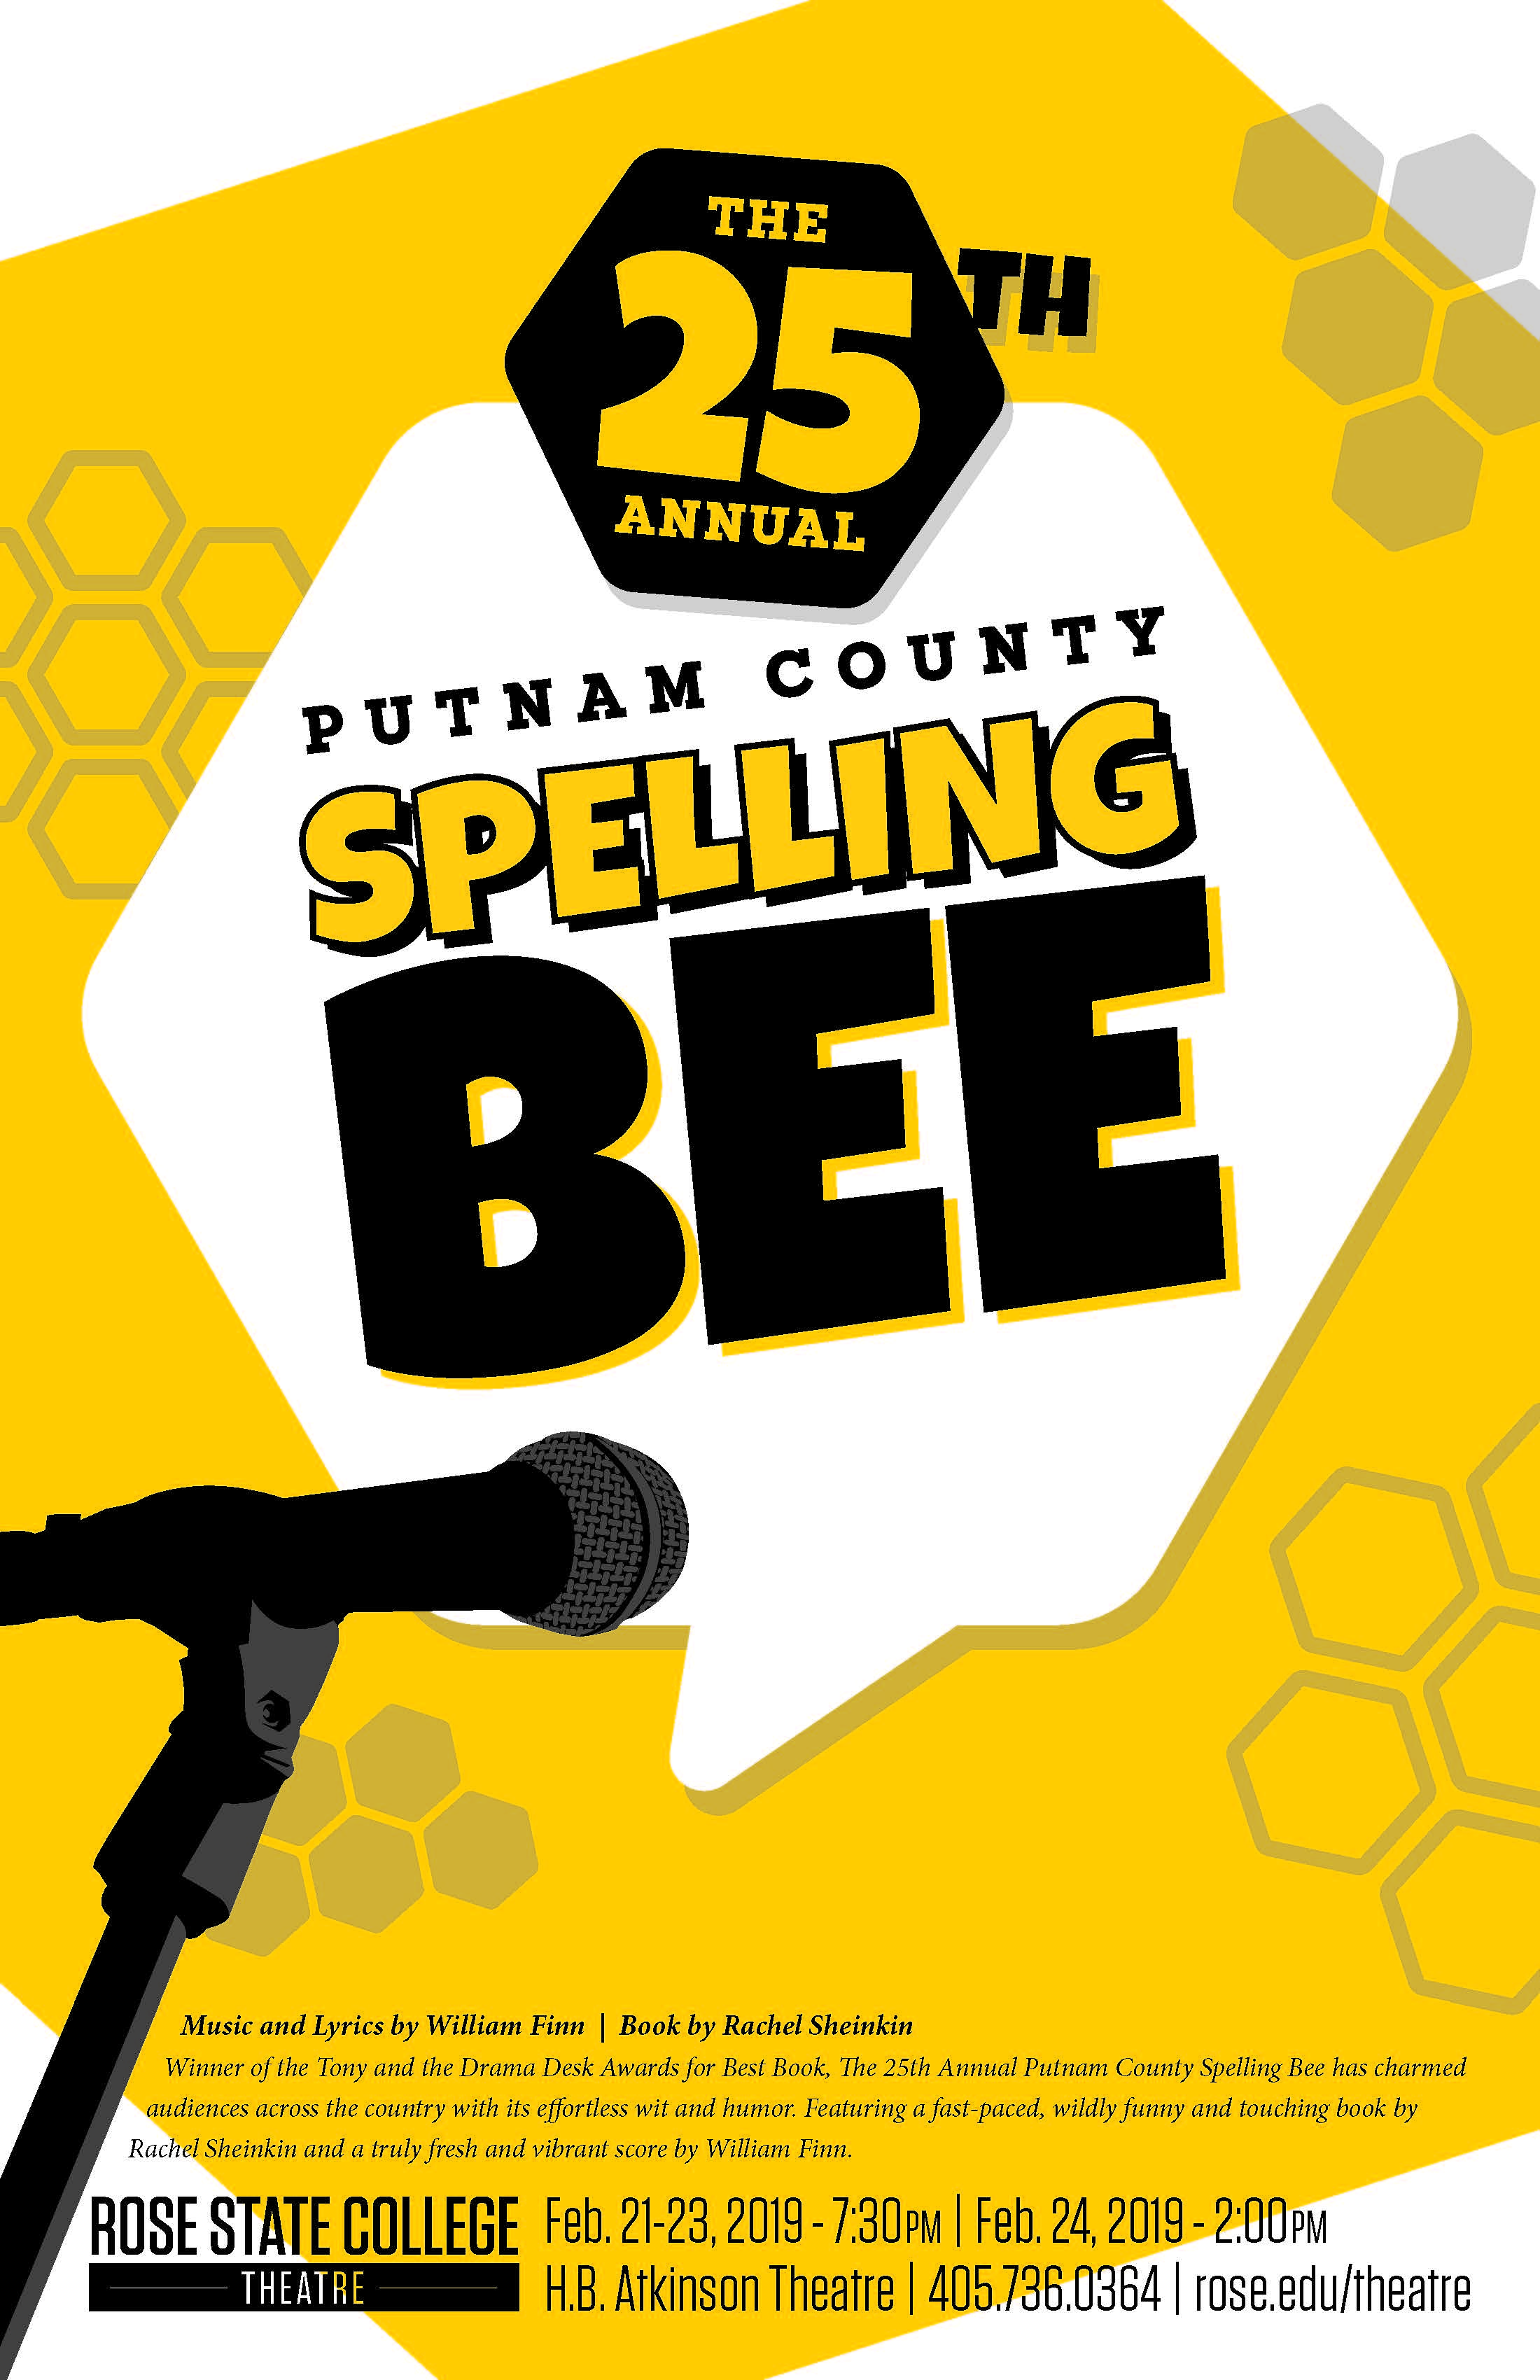 THE 25th ANNUAL PUTNAM COUNTY SPELLING BEE